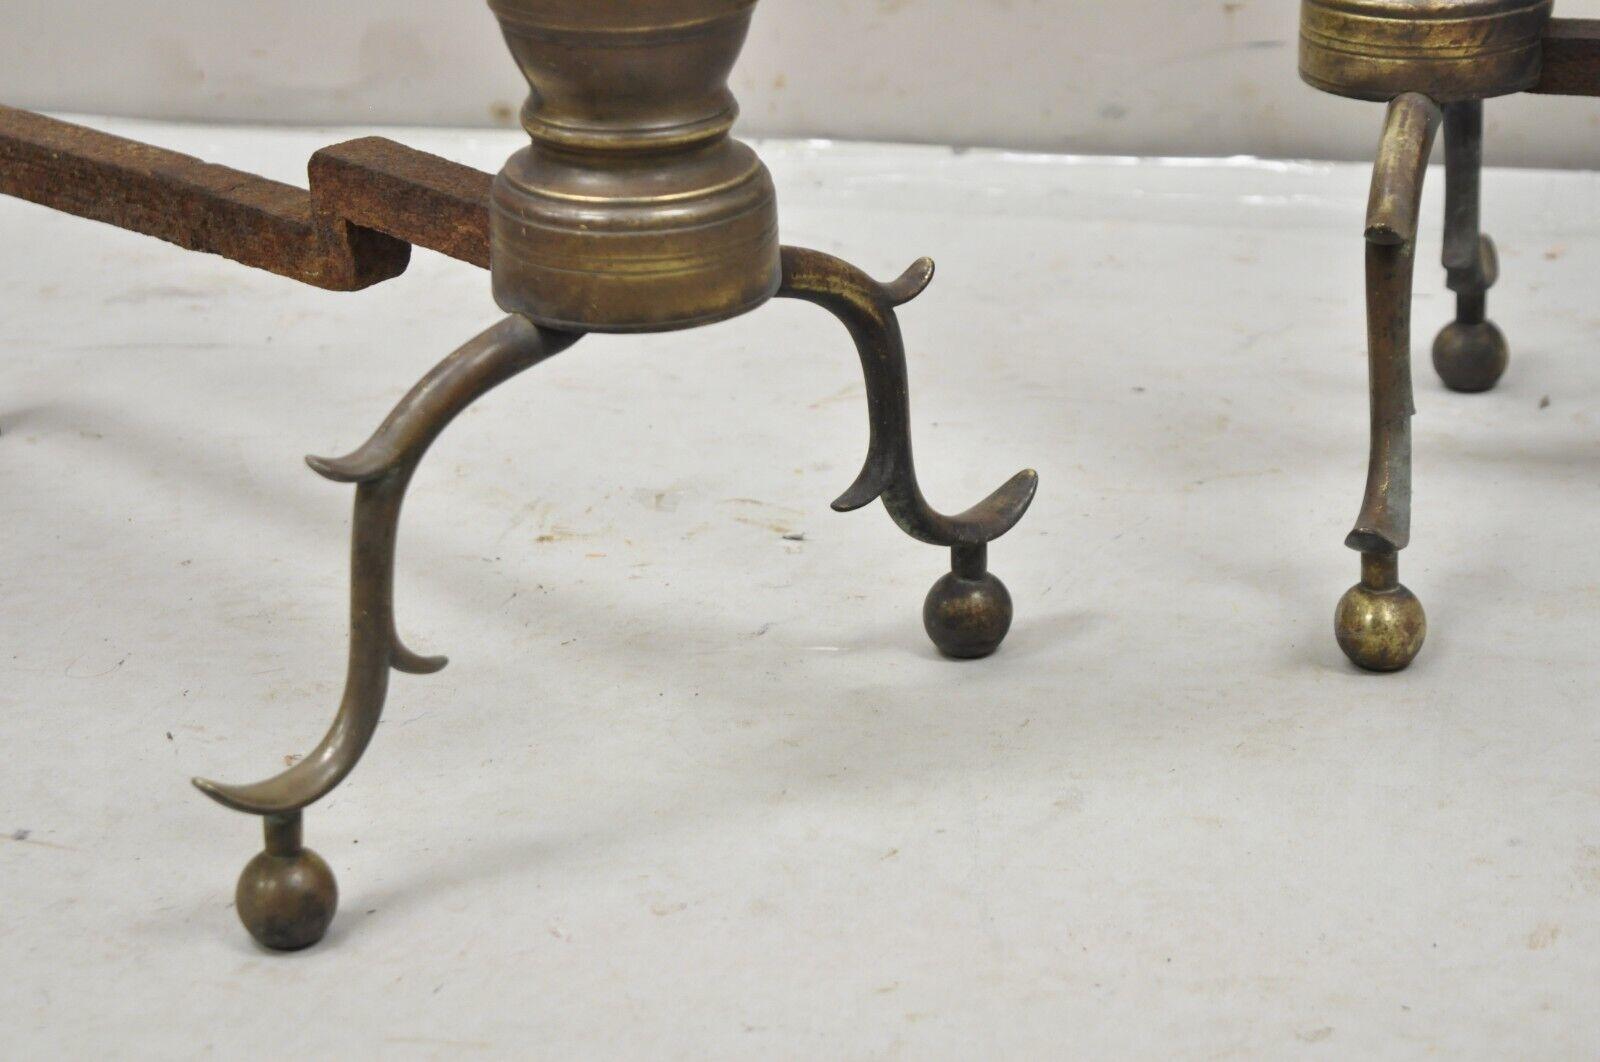 Antique Brass Federal Branch Leg Urn Finial Cast Iron Andirons - a Pair For Sale 4